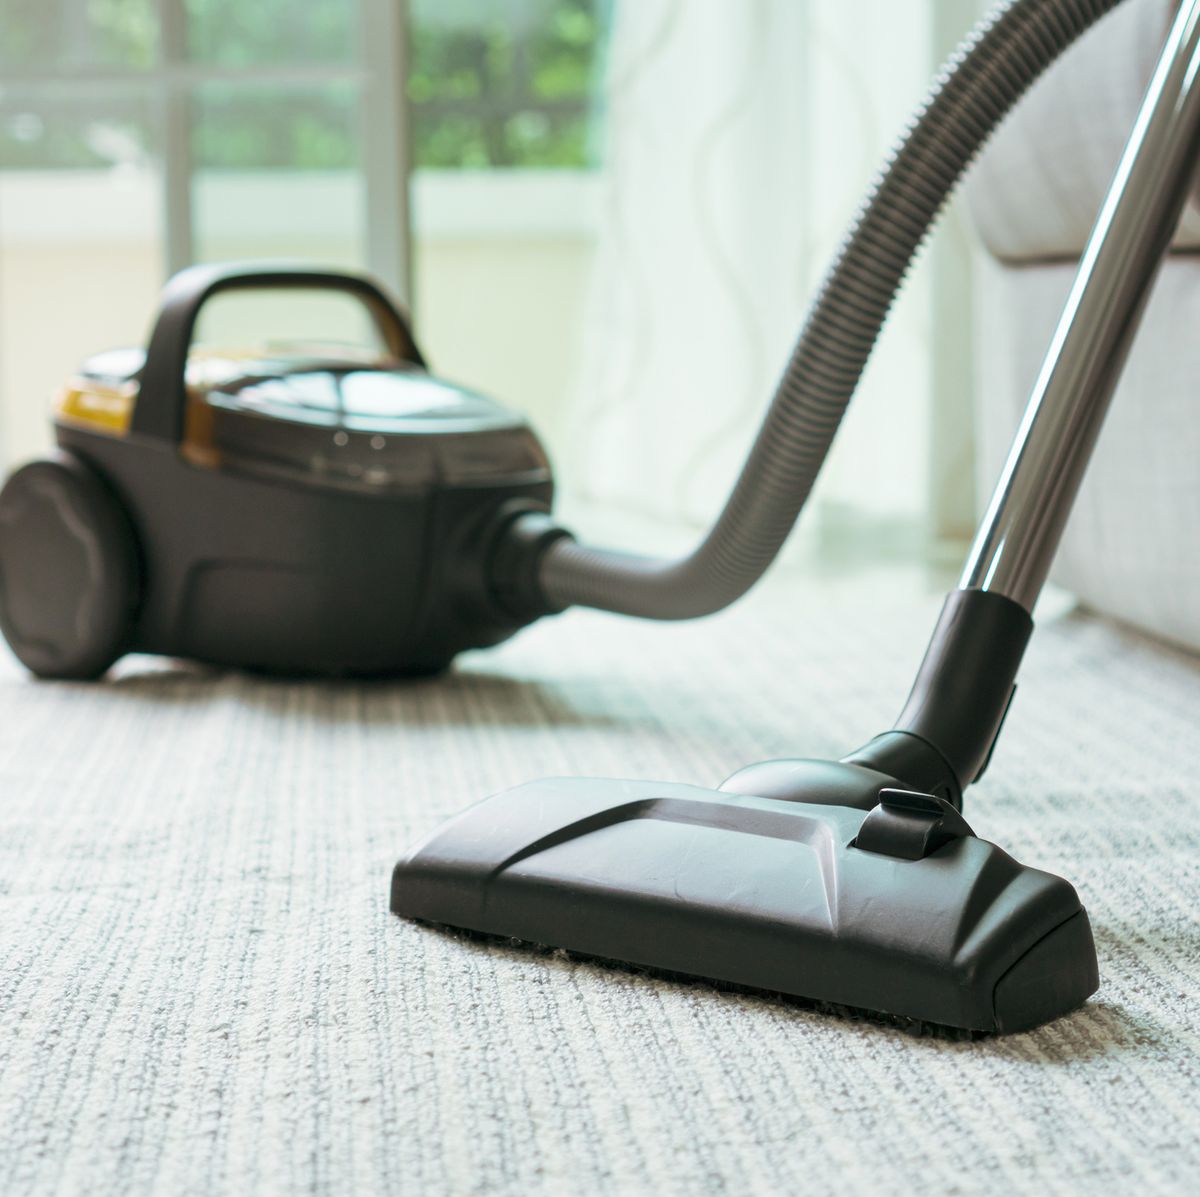 https://hips.hearstapps.com/hmg-prod/images/close-up-of-vacuum-cleaner-in-living-room-royalty-free-image-1617746688.?crop=0.668xw:1.00xh;0.135xw,0&resize=1200:*